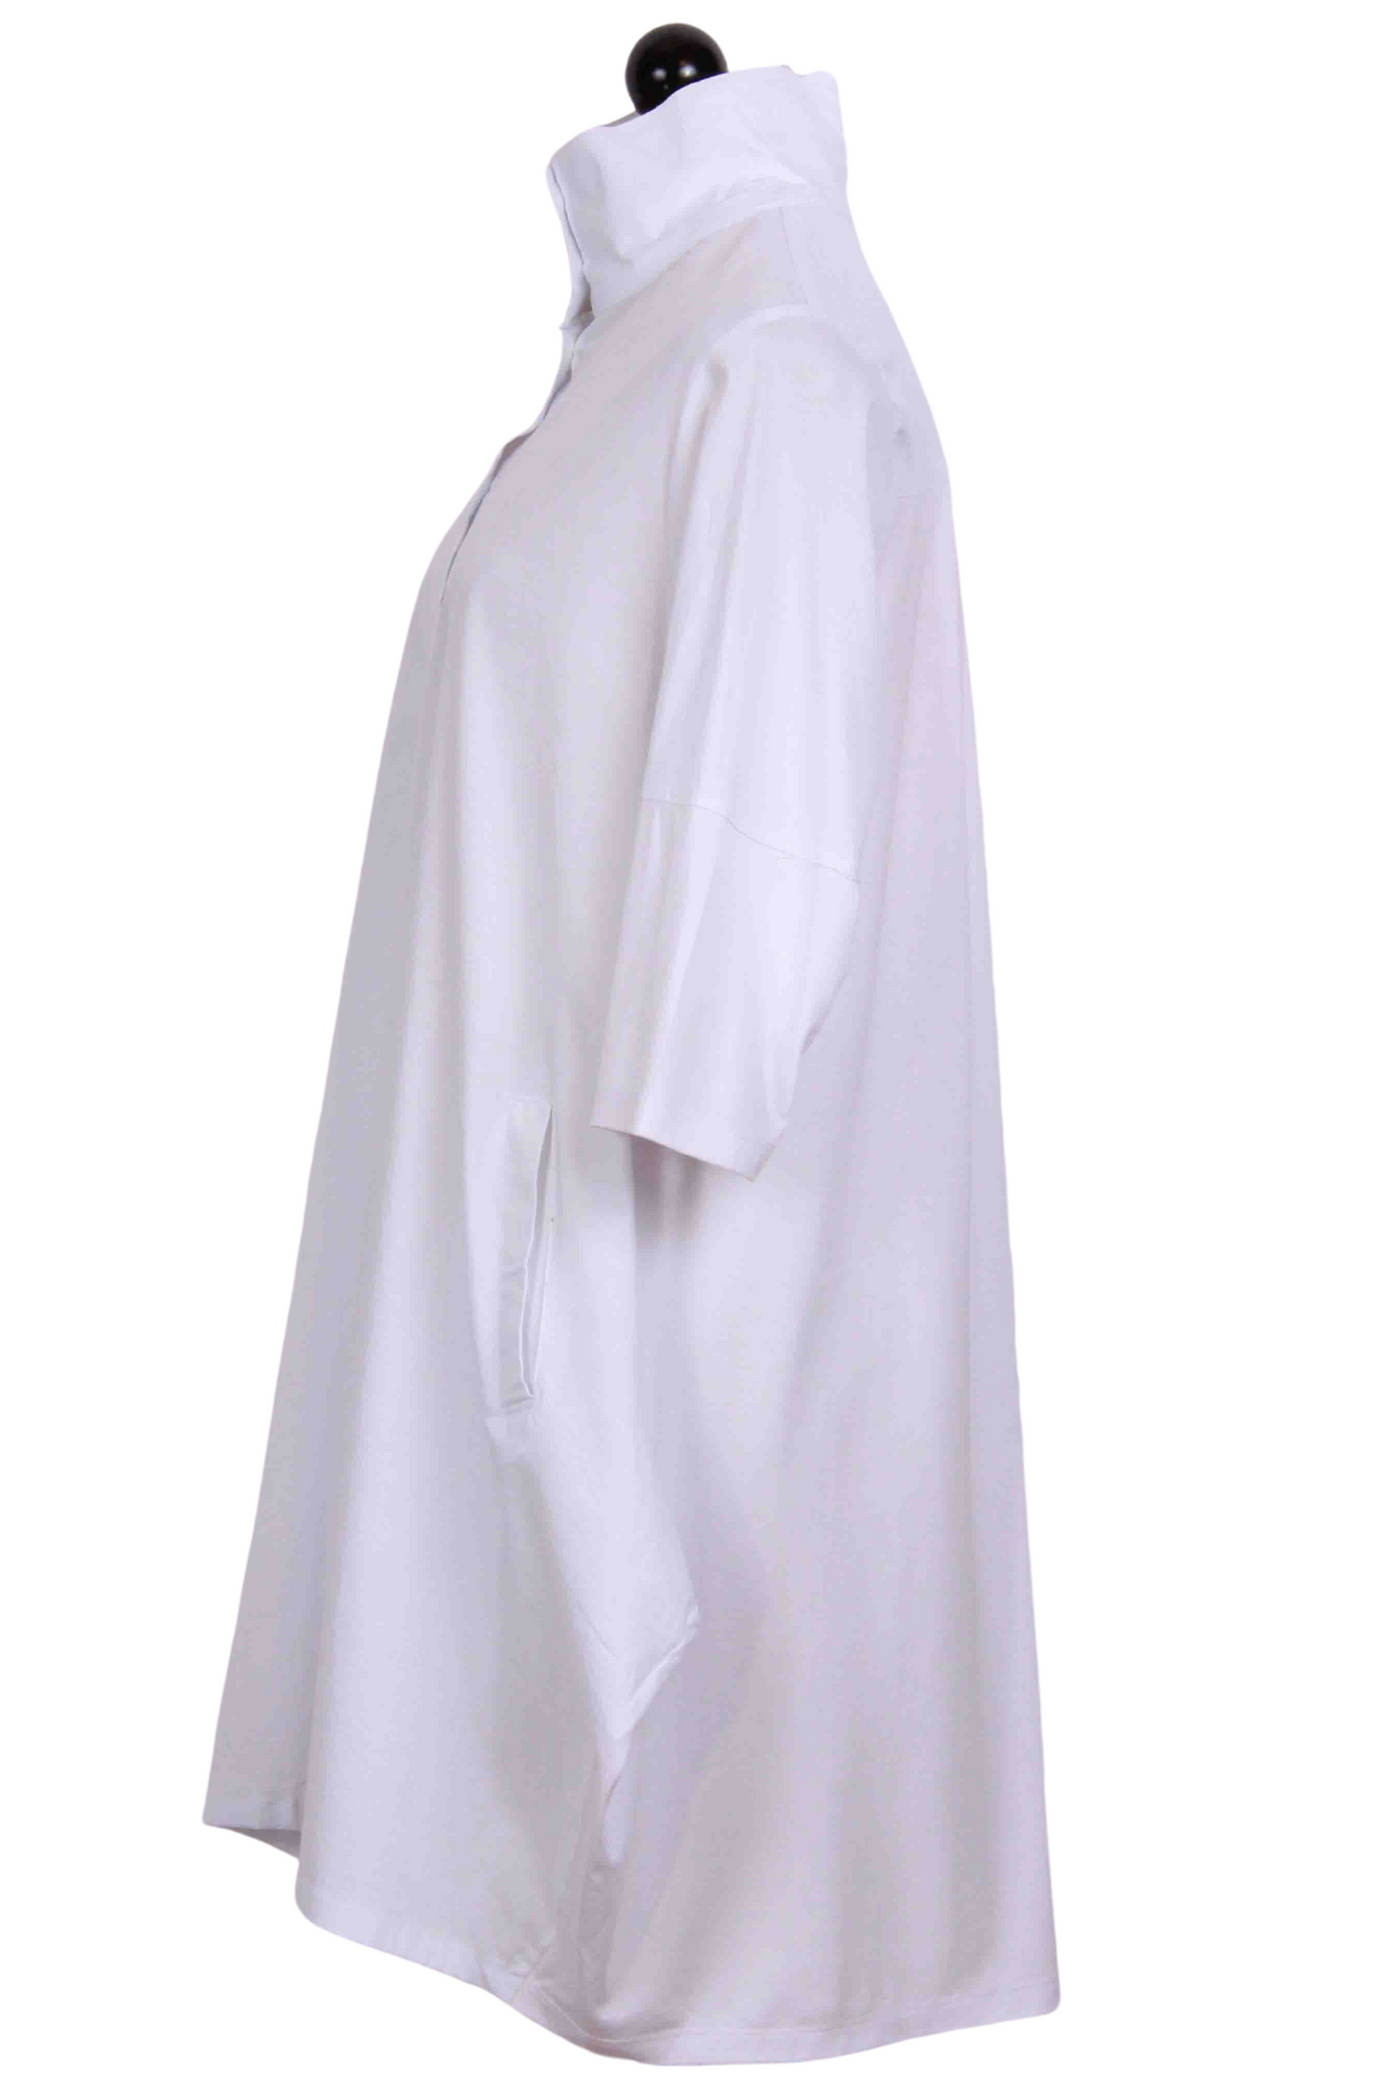 side view of white Piper Tunic by Kozan 